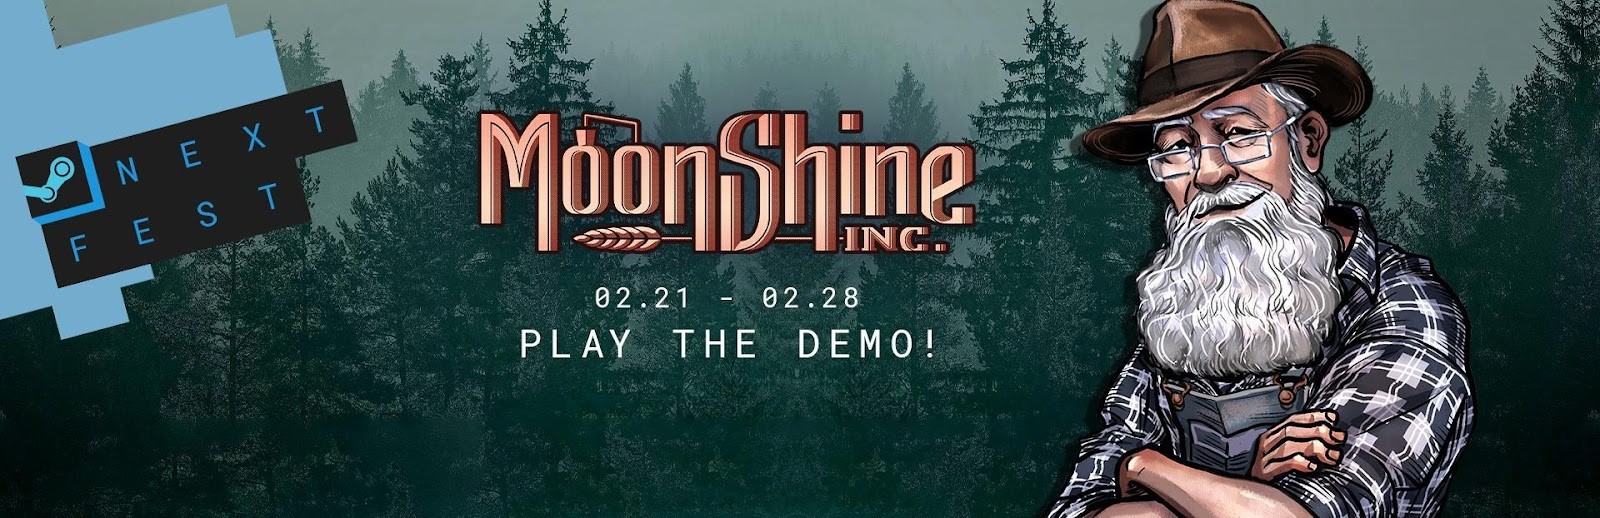 Moonshine Inc. - New Demo Available Soon